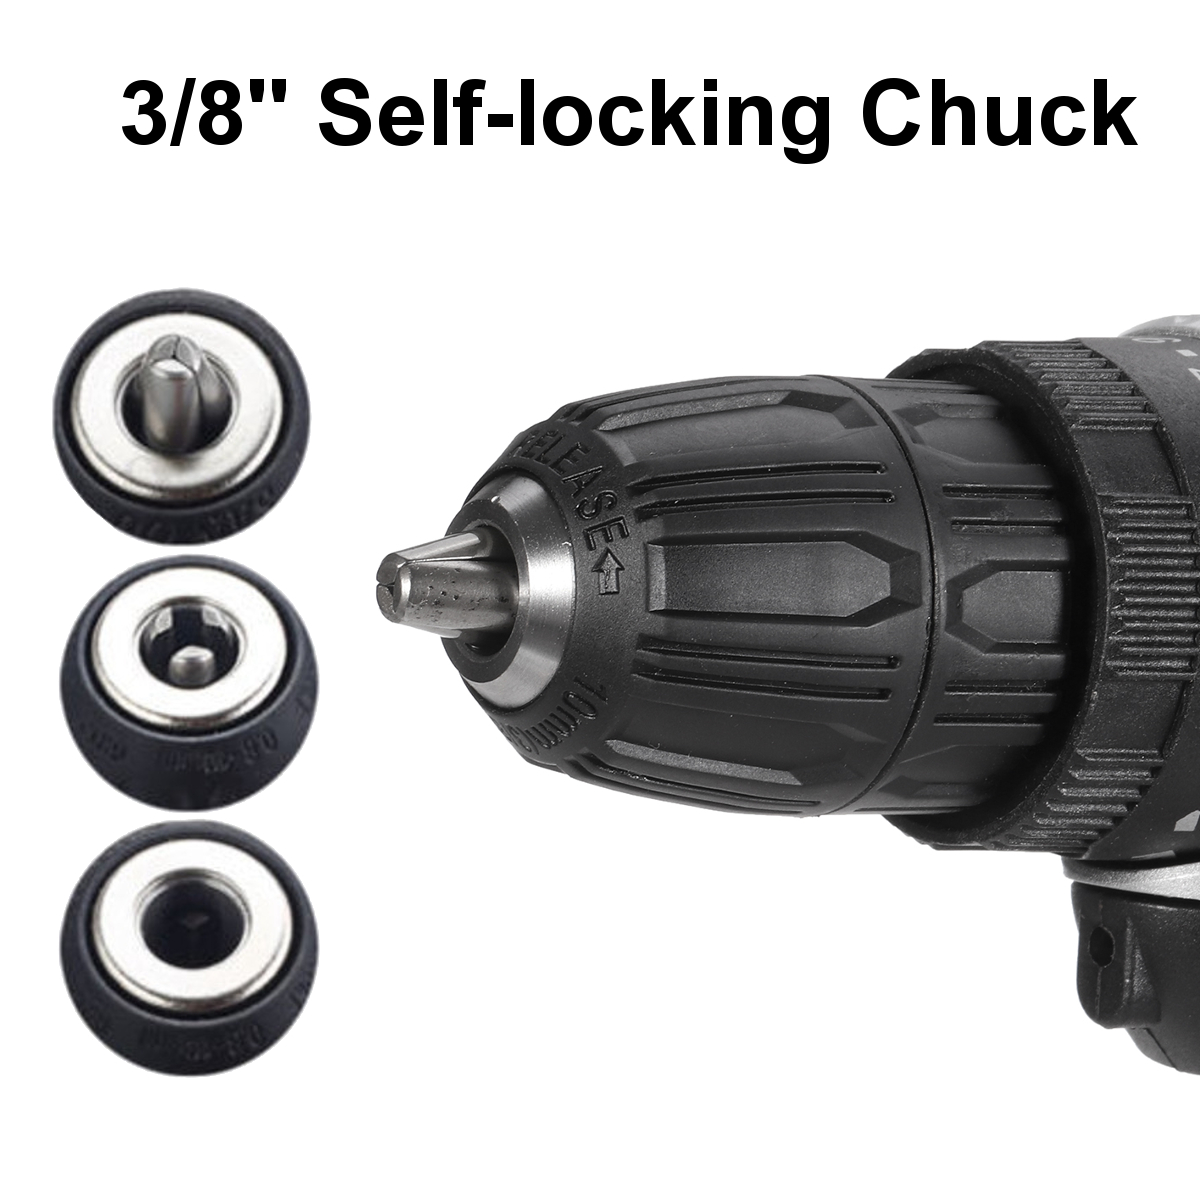 520Nm-48V-Cordless-Electric-Drill-Driver-38-Chuck-Rechargeable-Power-Drill-W-2pcs-Battery-1752199-8